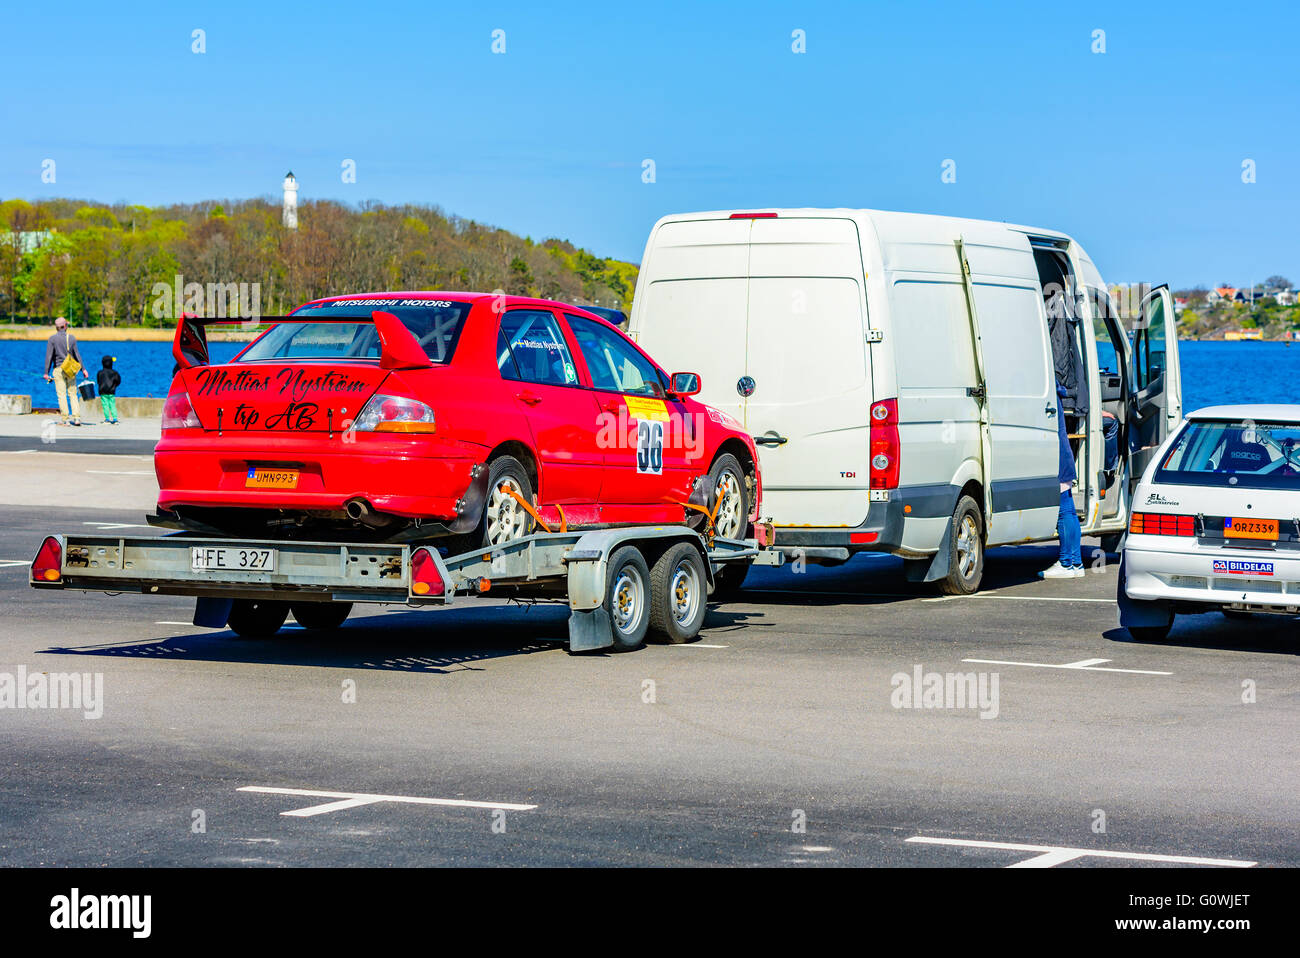 Karlskrona, Sweden. 5th May 2016. 41st South Swedish Rally is about to start. Preparations and arrivals are commencing. Here Mattias Nystroms red Mitsubishi Lancer EVO 8 has arrived to the docks in Karlskrona on a trailer. Mattias races for Ludvika MS together with codriver Alexander Glavsjo in the 4WD untrimmed (R4) group. Credit:  Ingemar Magnusson/Alamy Live News Stock Photo